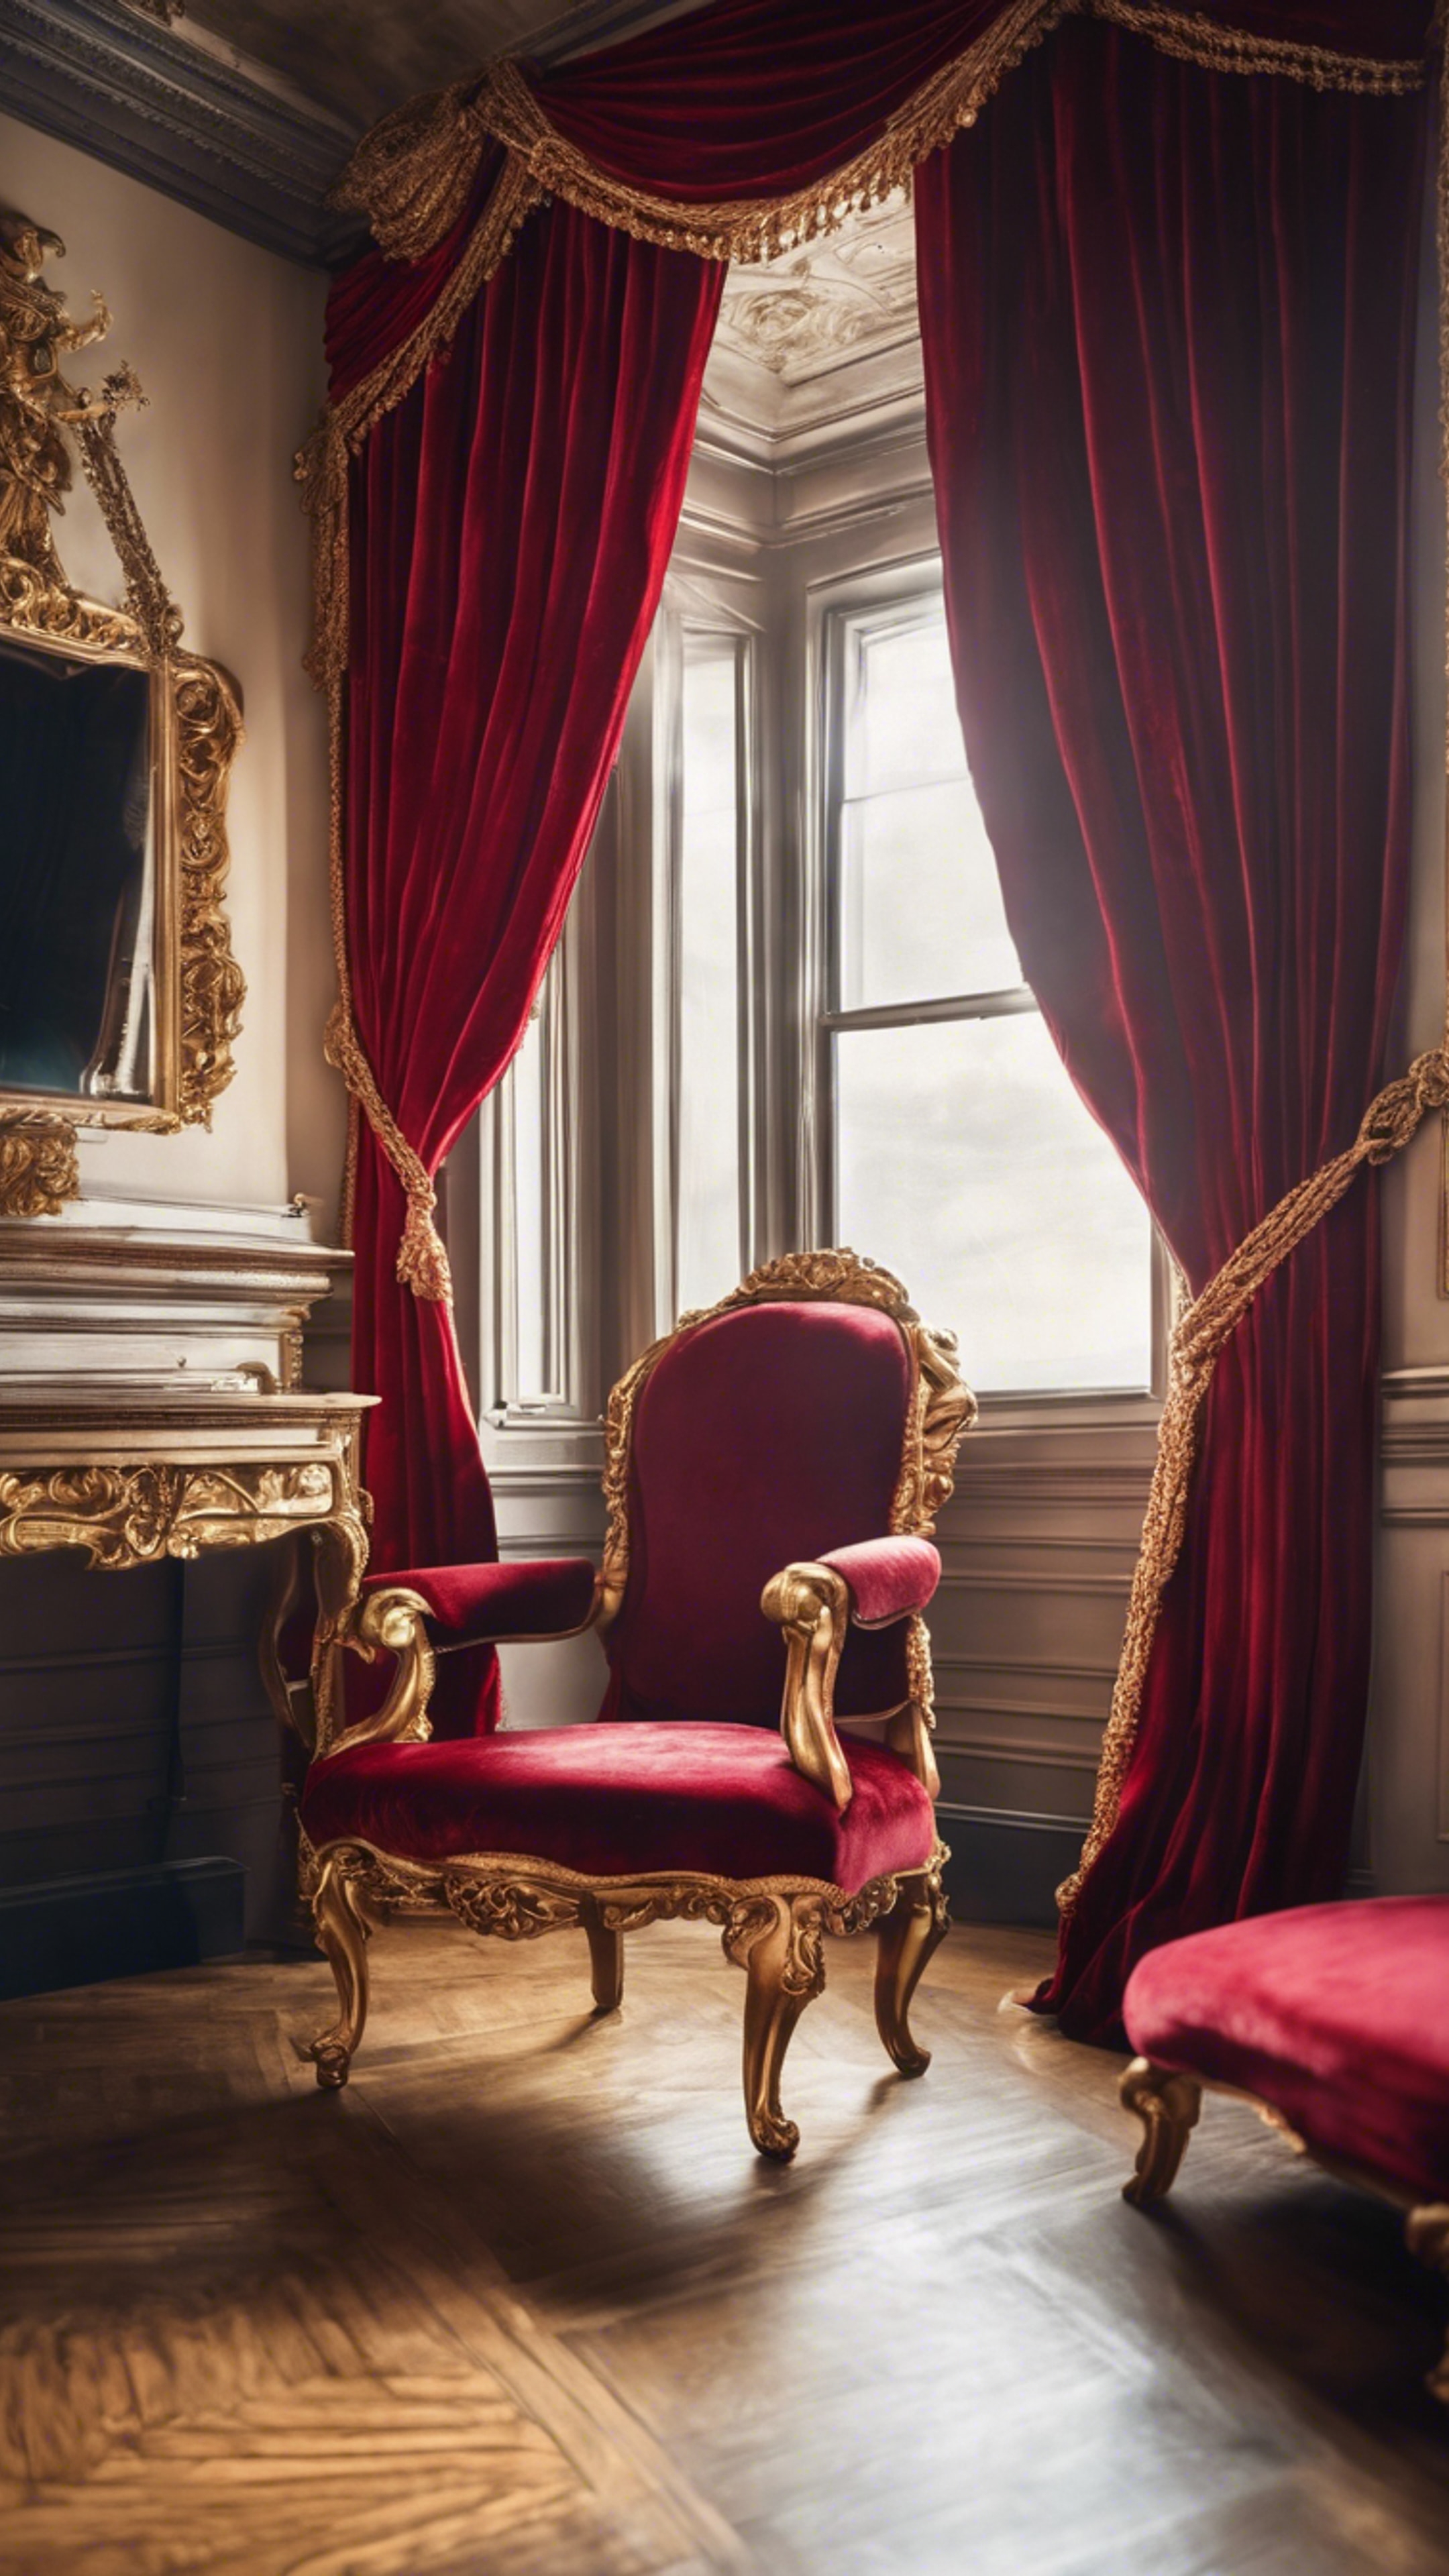 Red velvet drapes tied back with gold ropes in a grand victorian-style living room. Papel de parede[6c8dd2a9b4f74c0eb869]